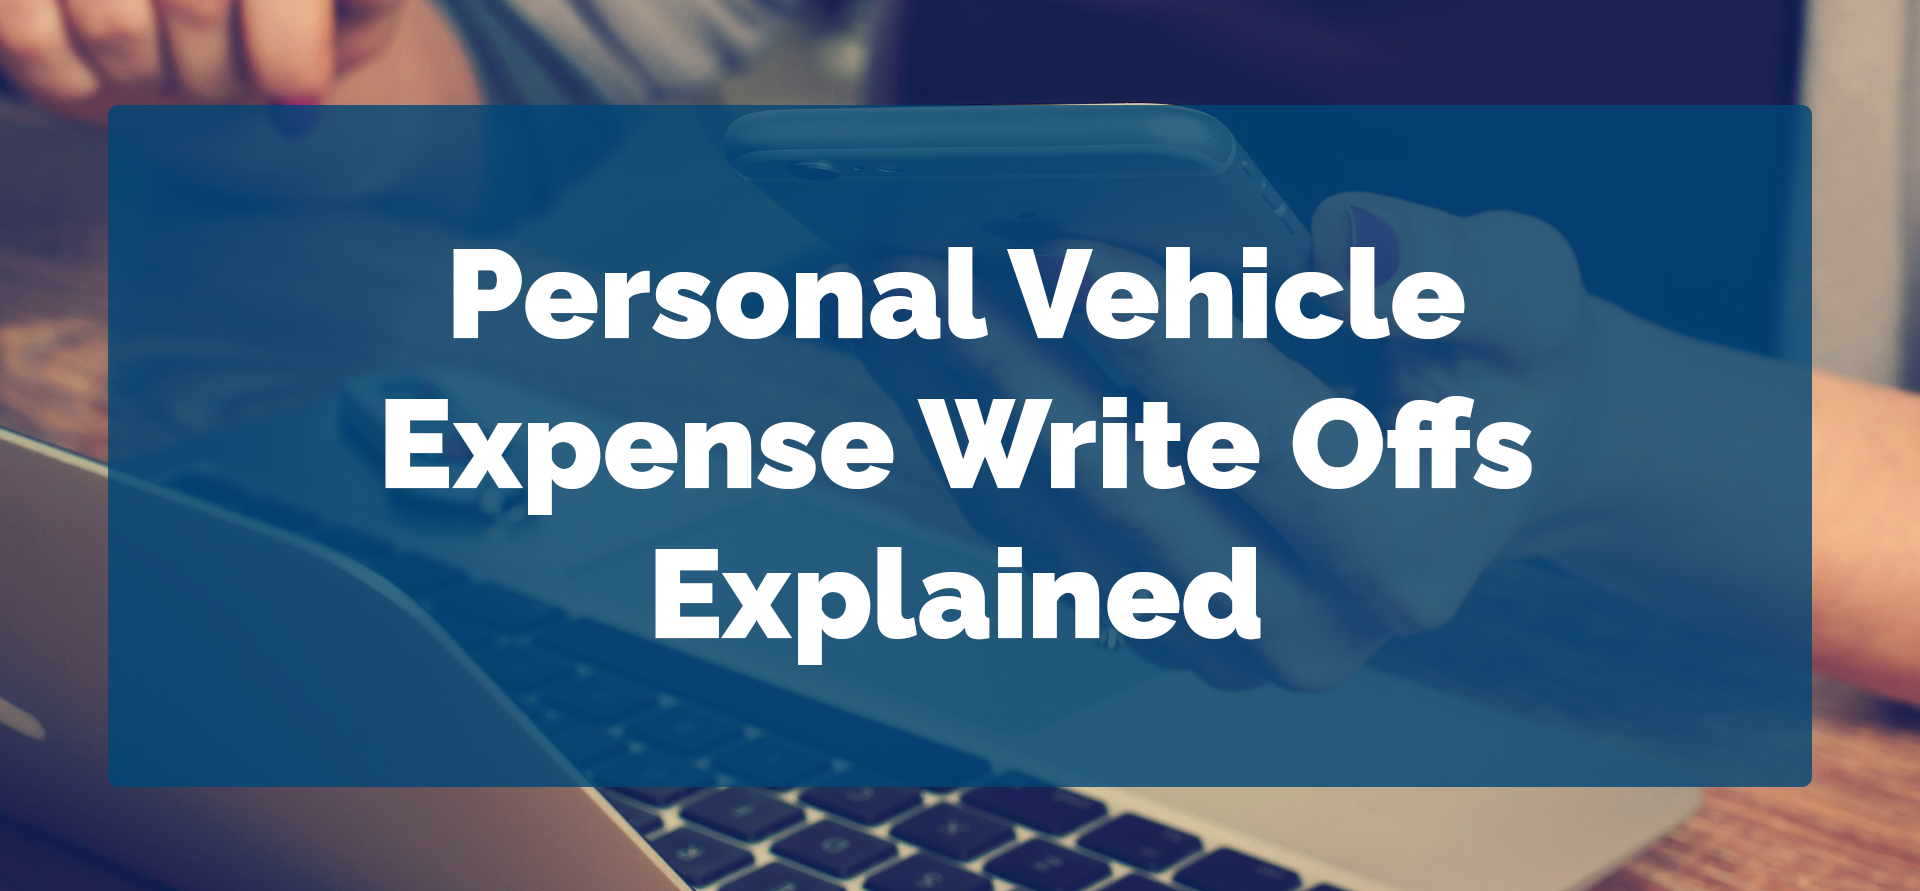 Personal Vehicle Expense Write Offs Explained